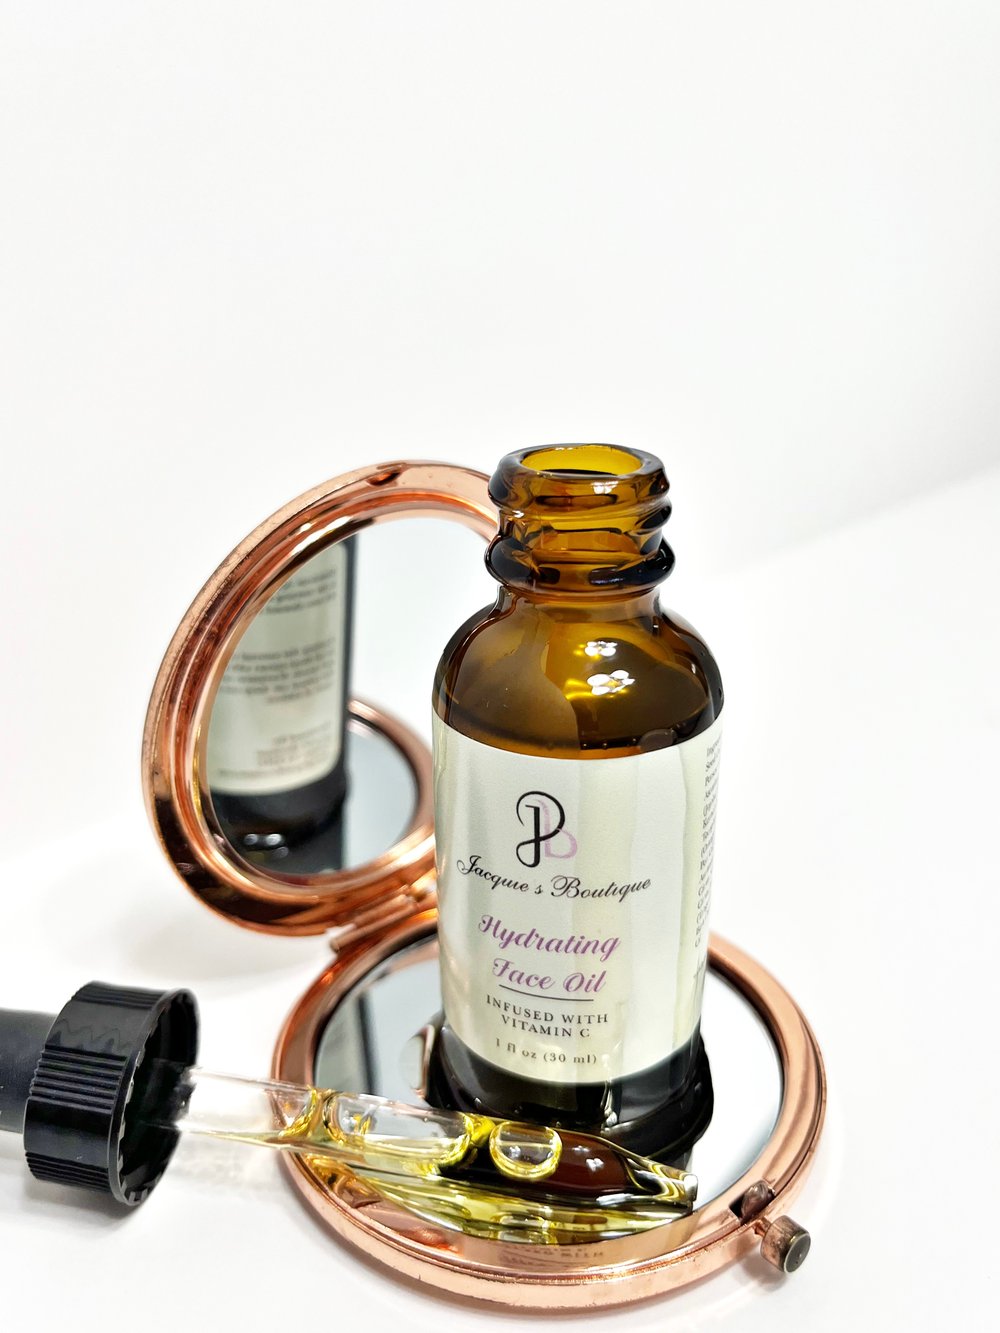 Image of Hydrating Face Oil infused with Vitamin C 